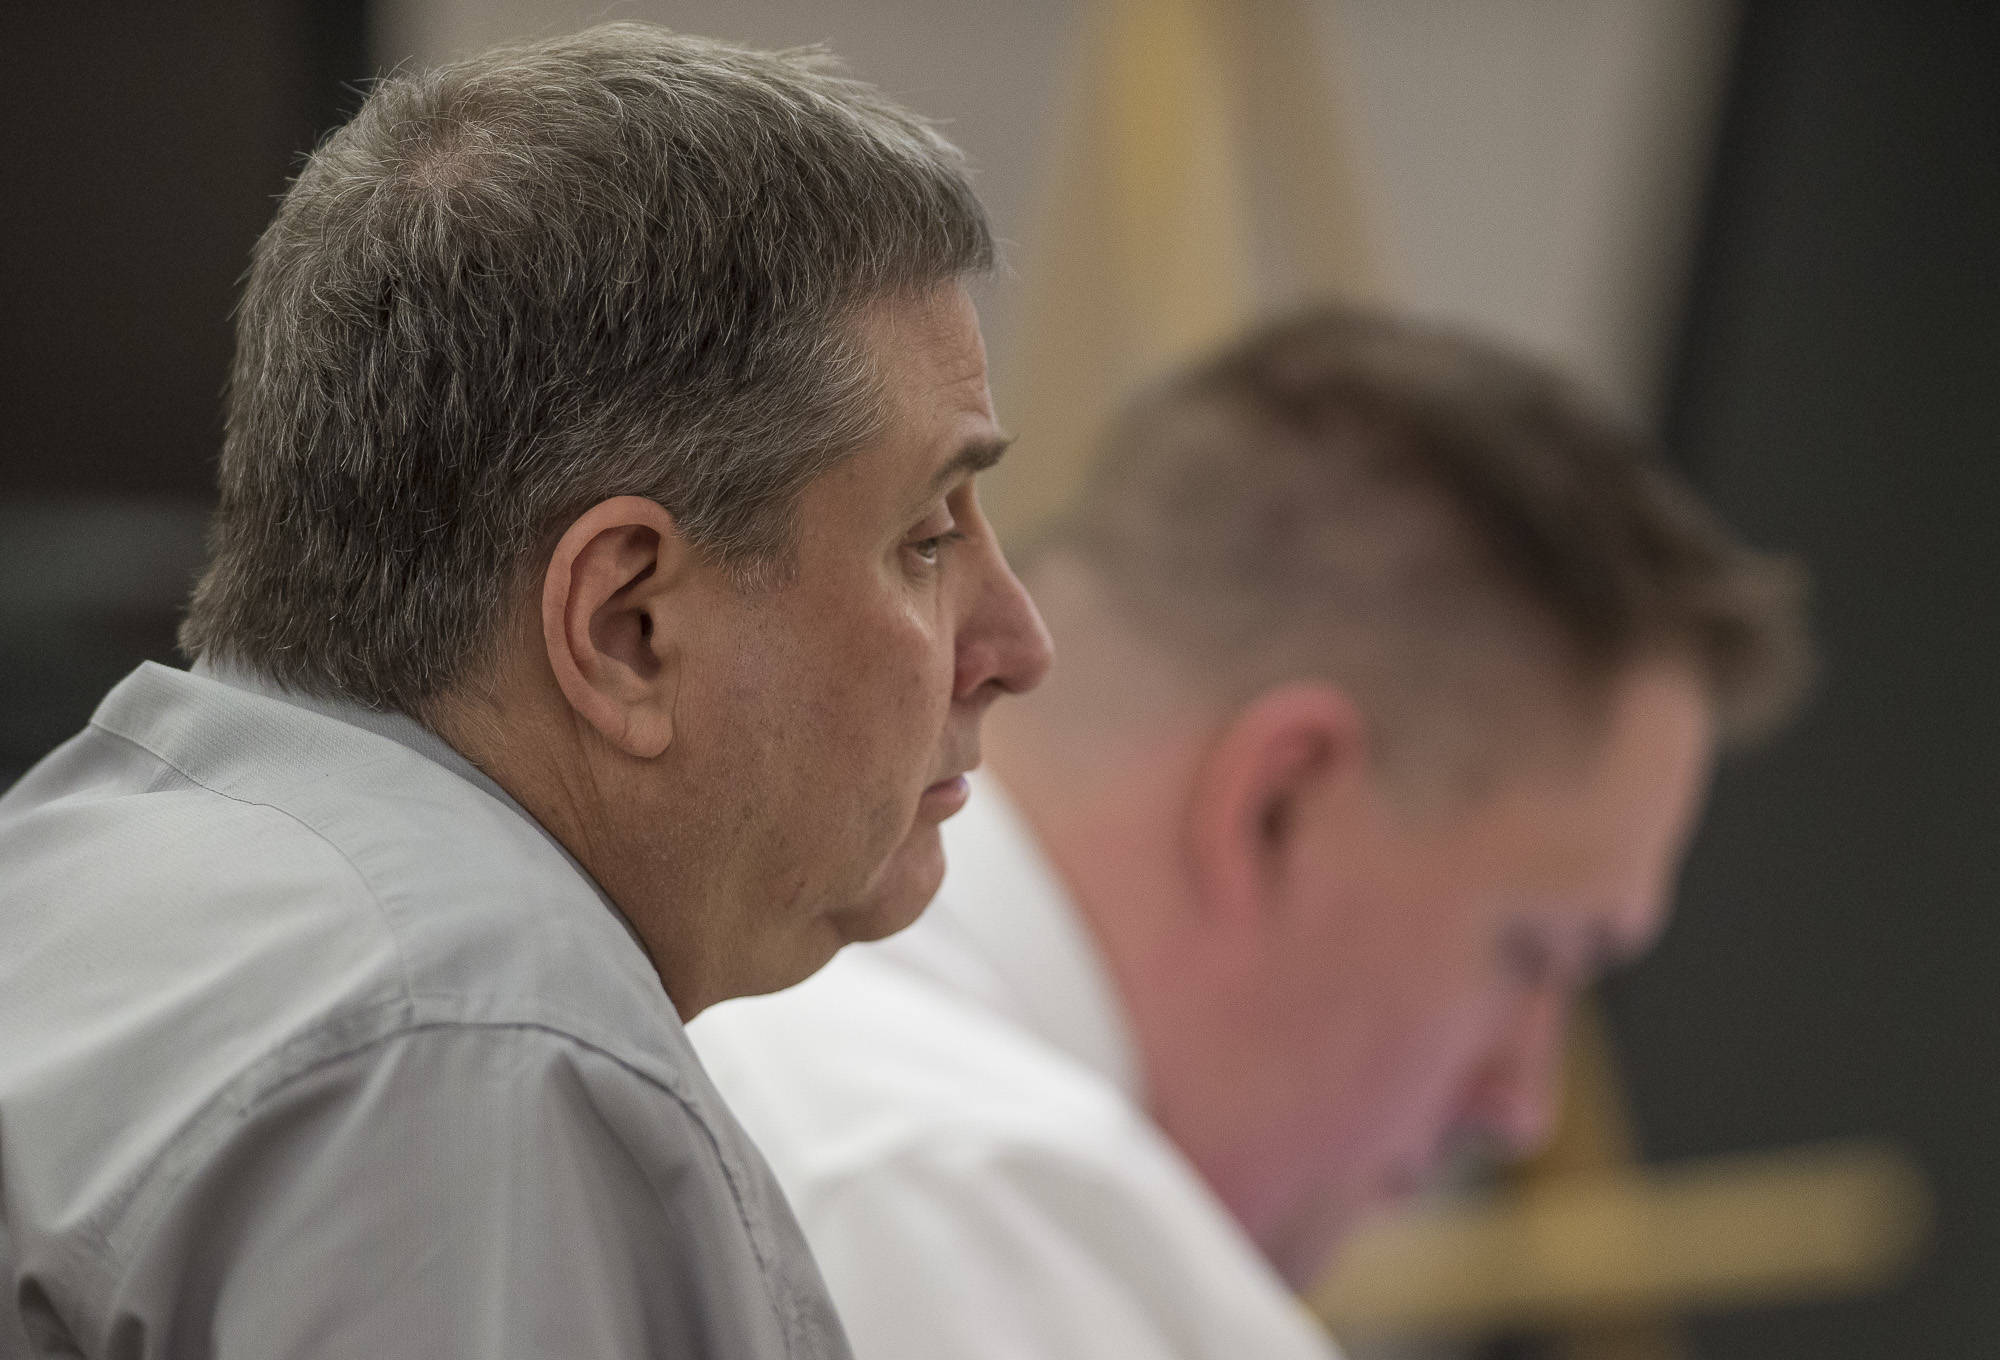 Mark De Simone listens during his trial in Juneau Superior Court on Tuesday, May 1, 2018. De Simone is accused of killing Duilio Antonio “Tony” Rosales during a hunting trip in Excursion Inlet in 2016. (Michael Penn | Juneau Empire)